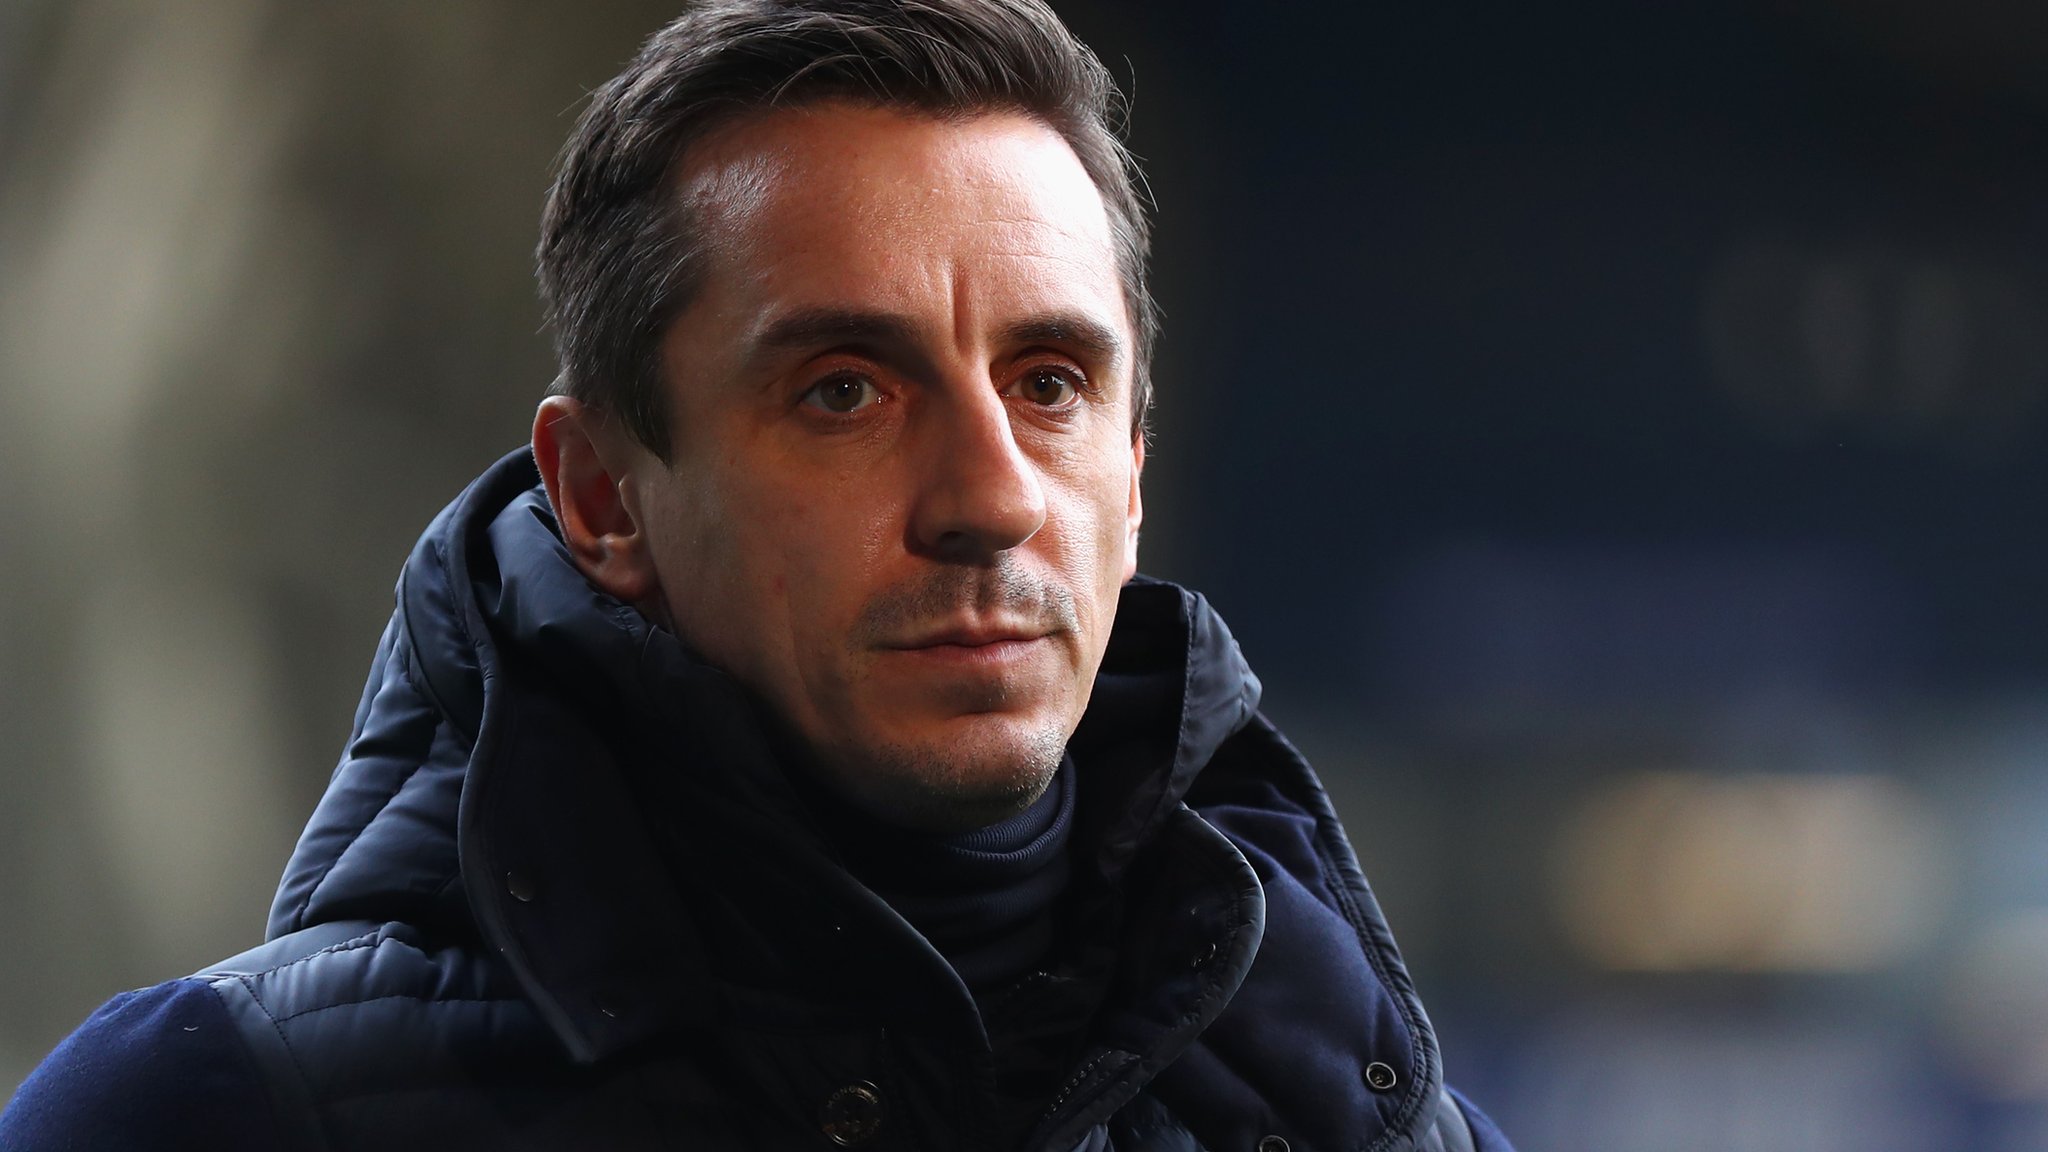 Neville and Accrington owner in Twitter row over Salford 'stealing' league place